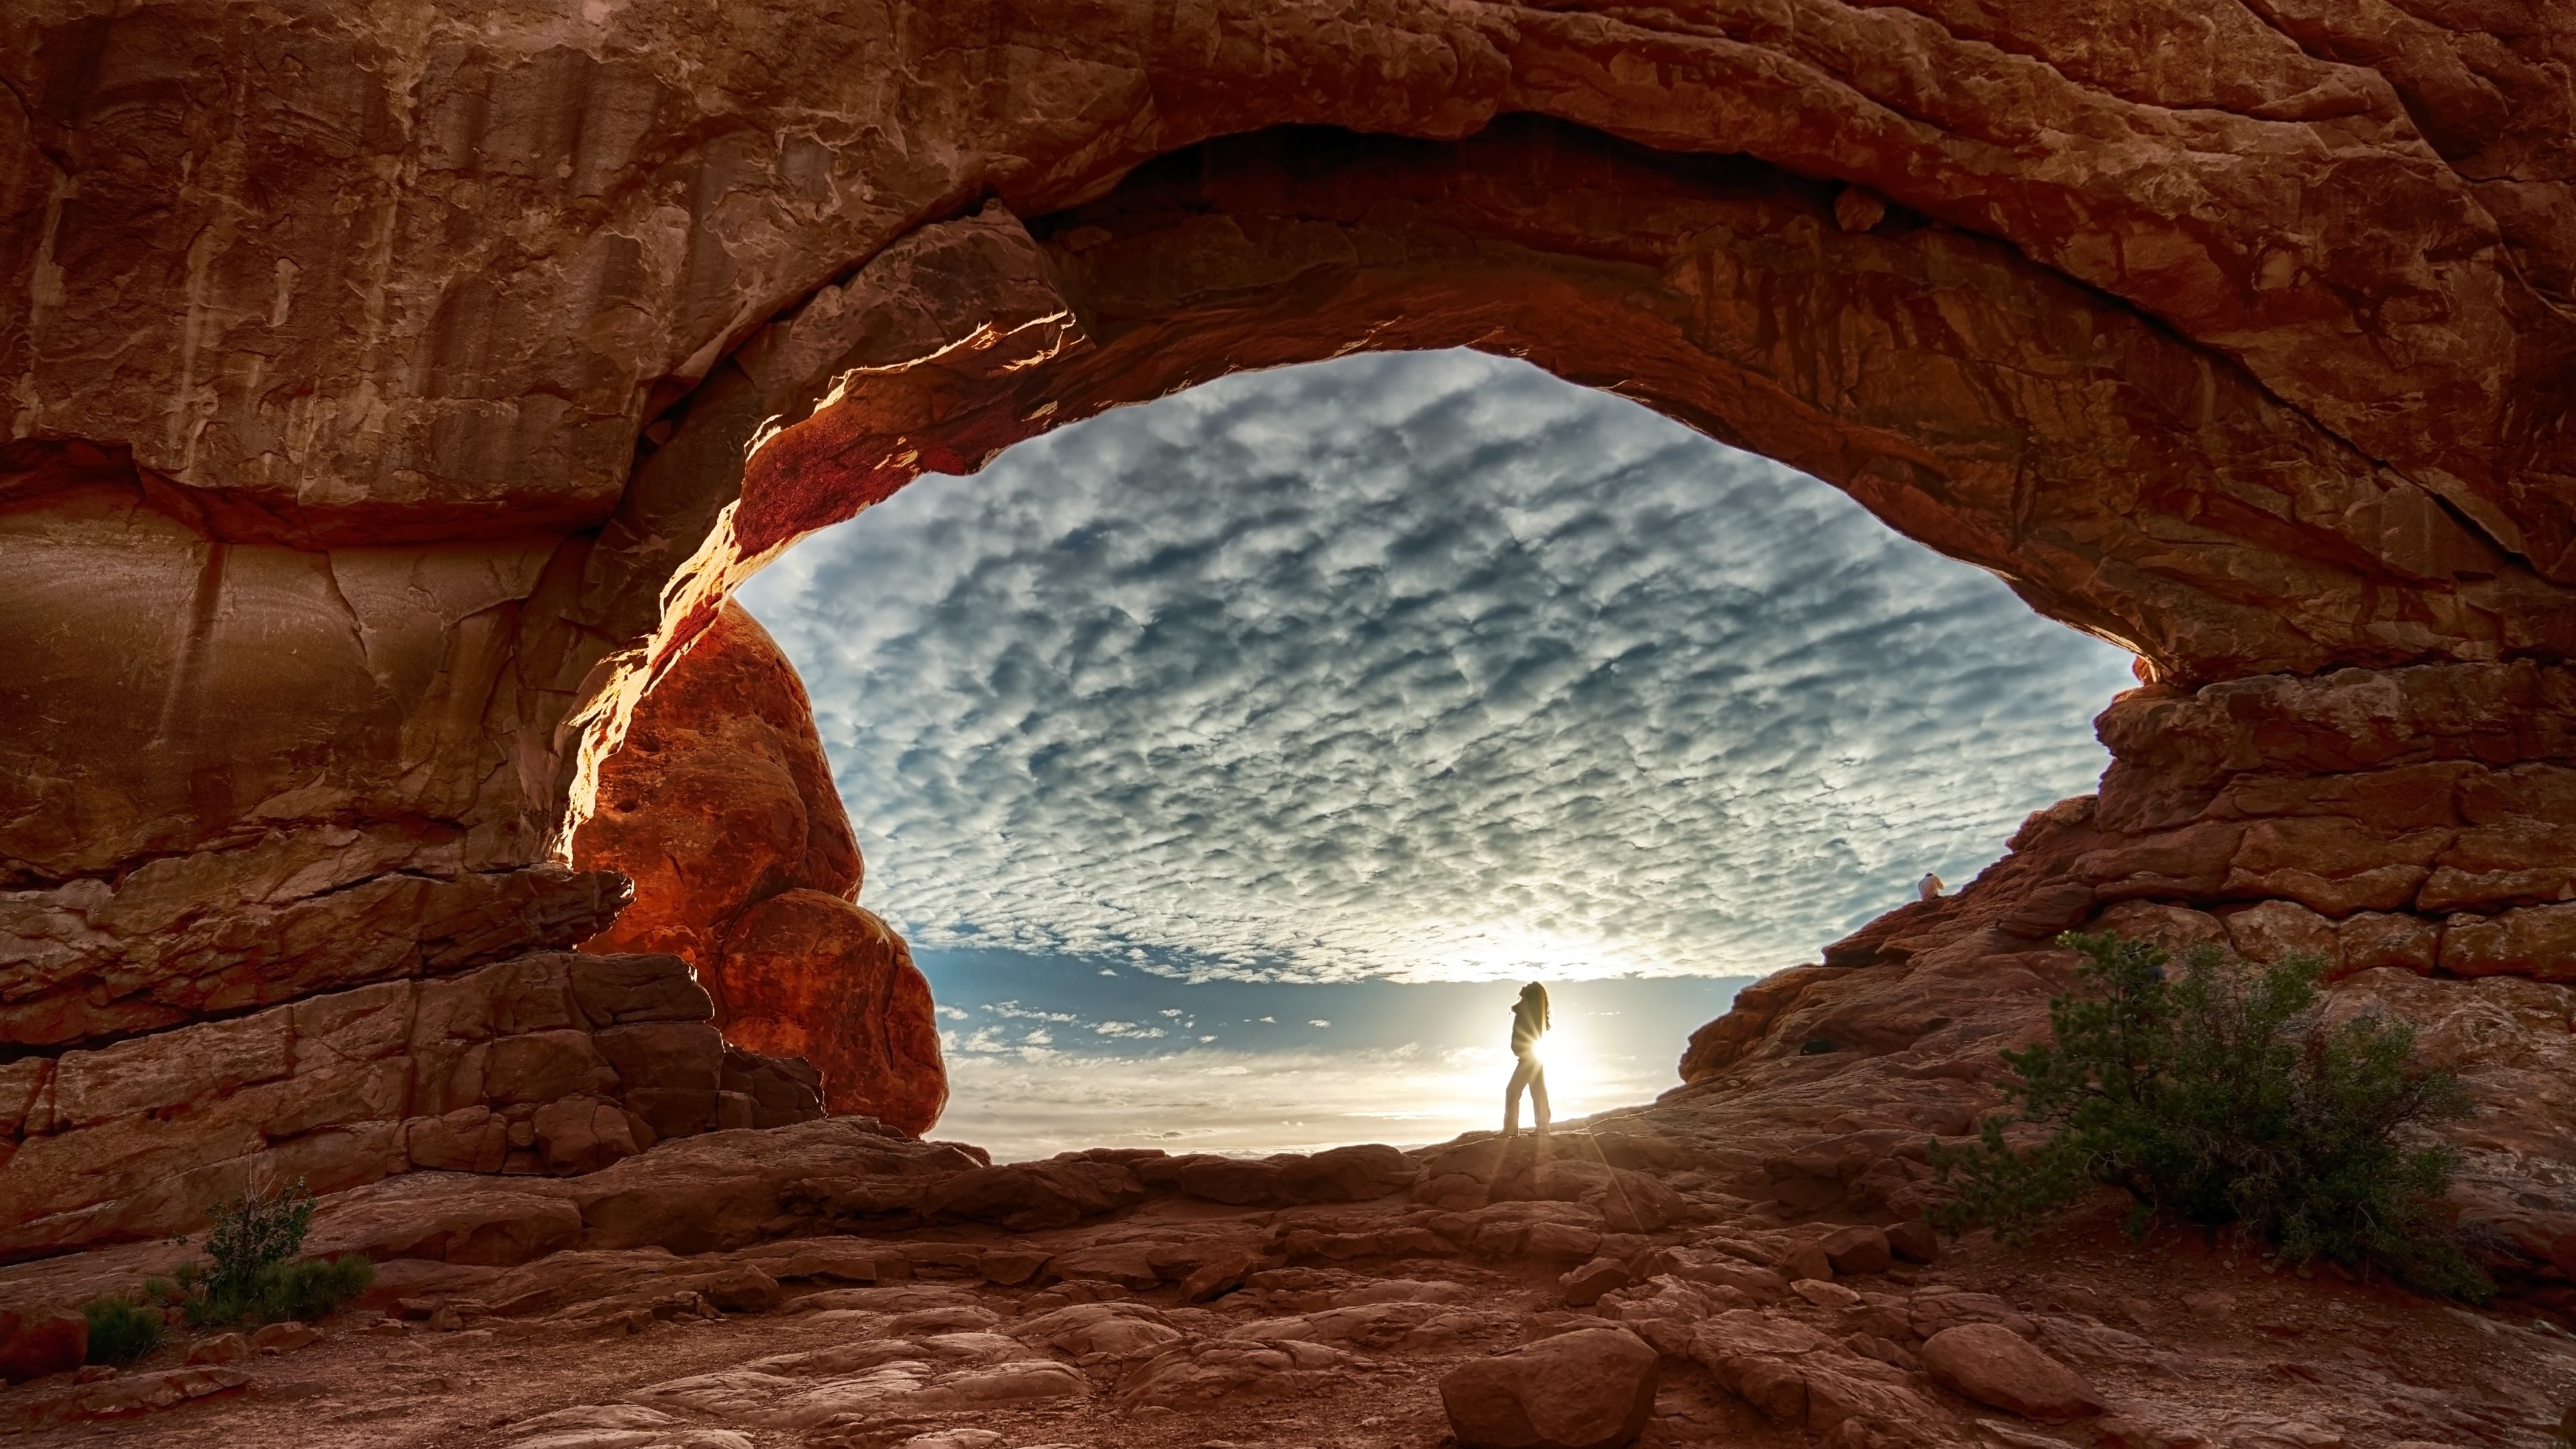 4k Hd Wallpaper Window Arch At Arches National Park Epic Picture With The Arch 3840x2160